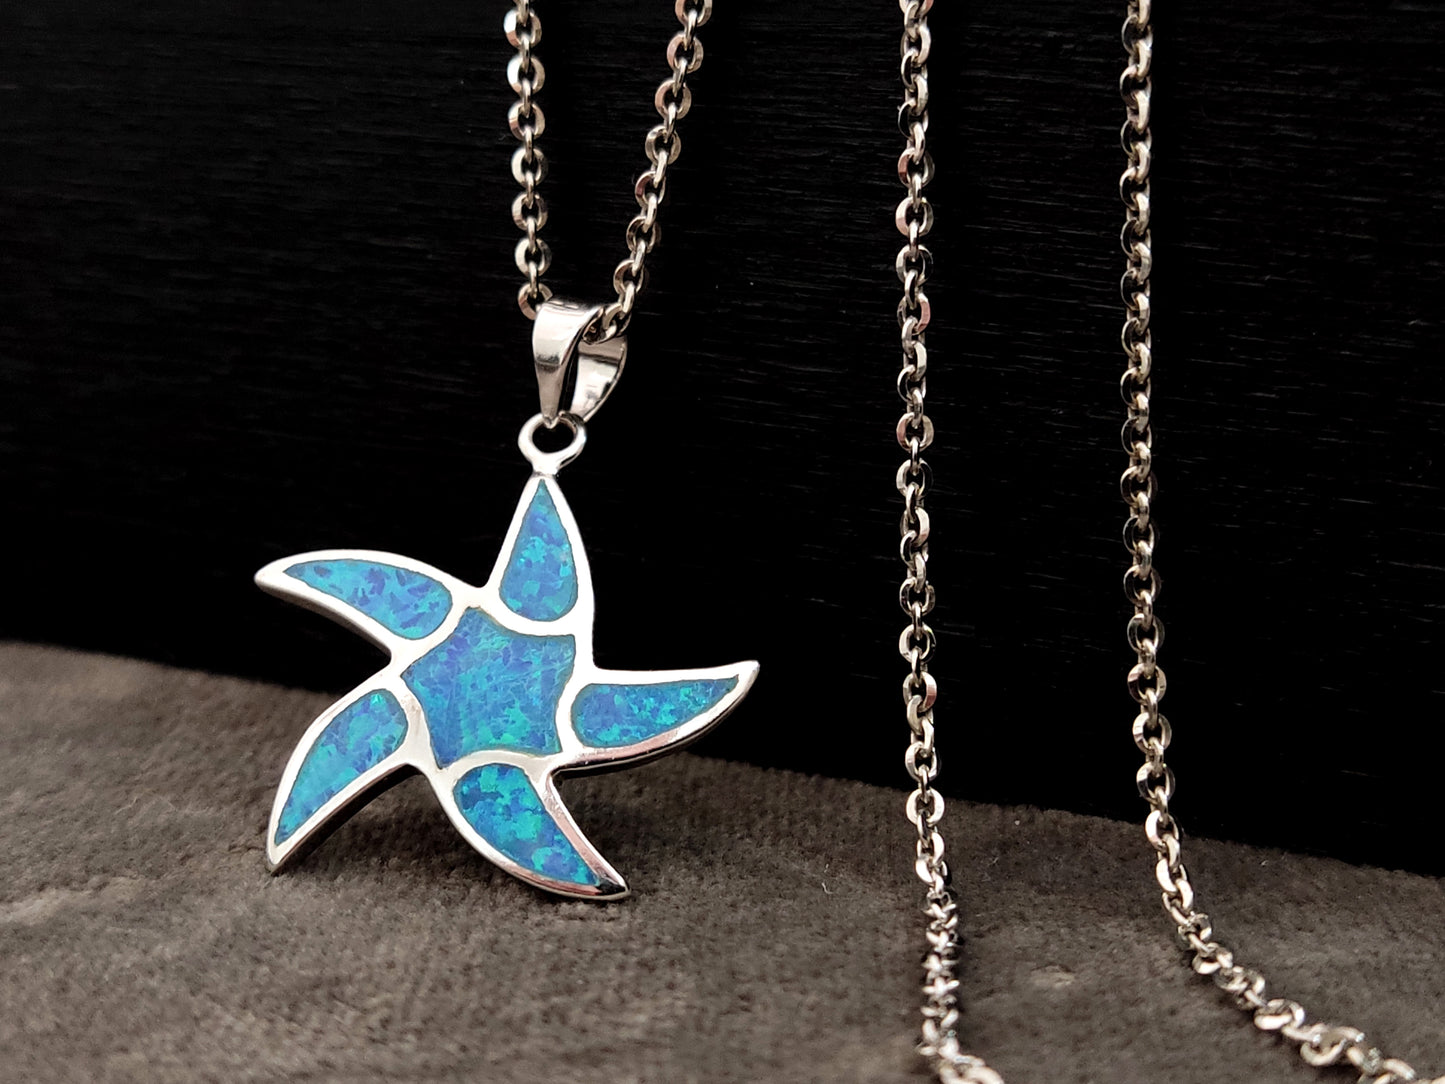 Starfish blue opal silver pendant measuring 25mm with silver fine chain on black and gray background.